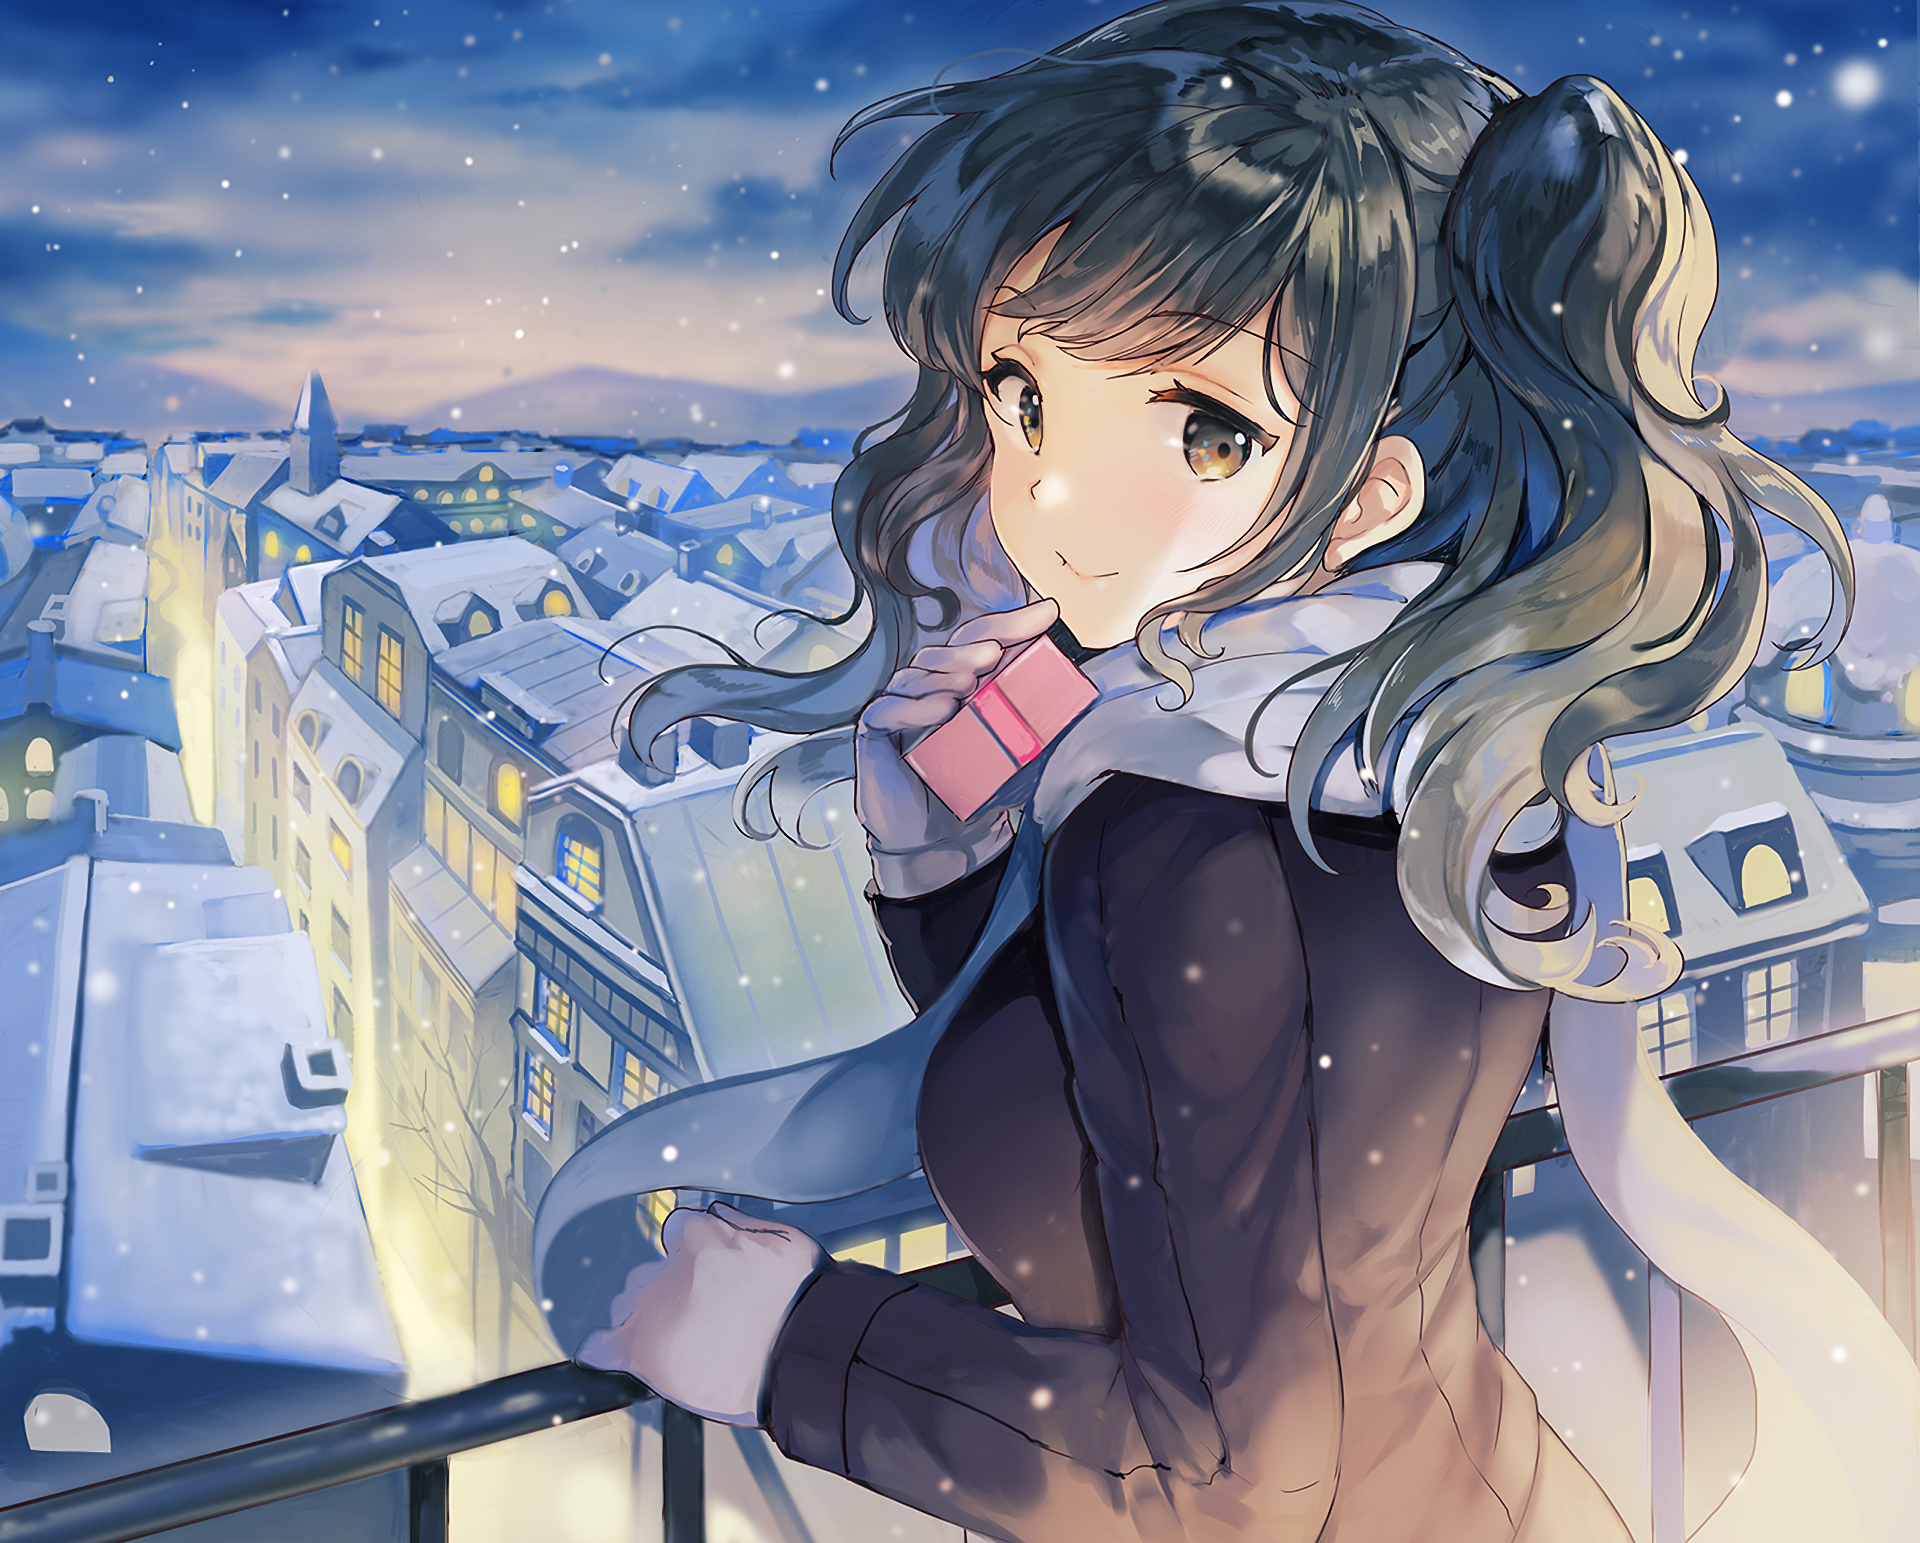 Wallpaper, anime girls, original characters, winter, cold, looking at viewer, gift, brunette, long hair, smiling, cityscape, sky, artwork, mountains 1920x1543